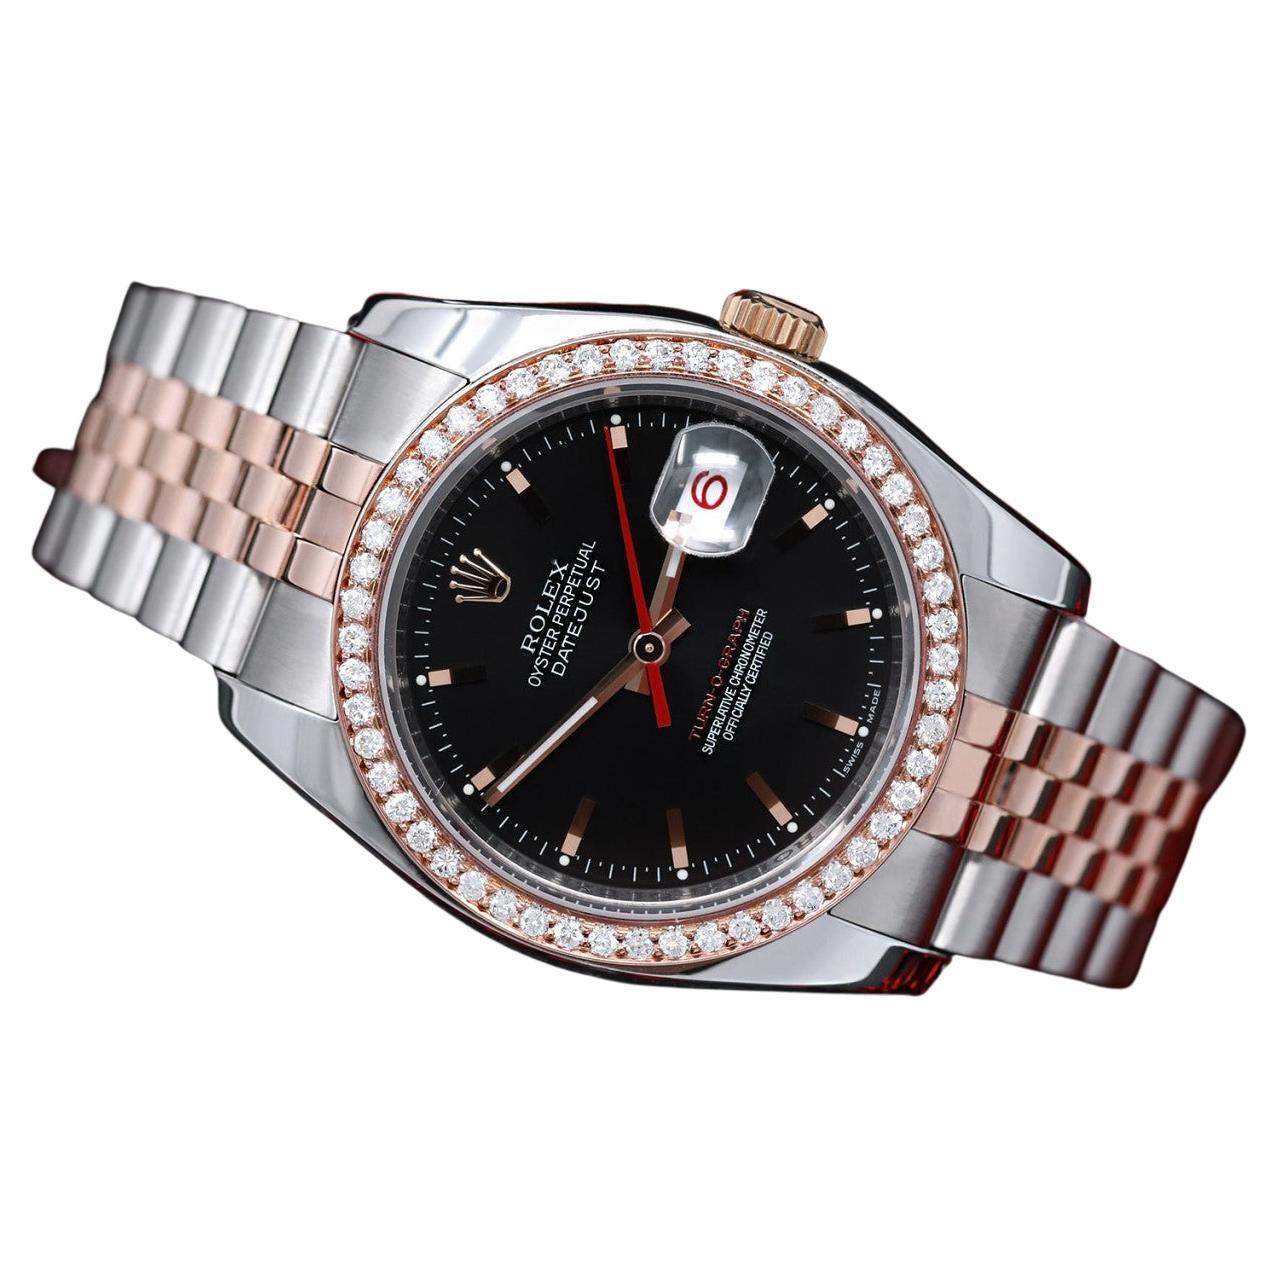 Rolex Datejust Turn-o-graph 116261 Two Tone Stainless Steen and Rose Gold Watch